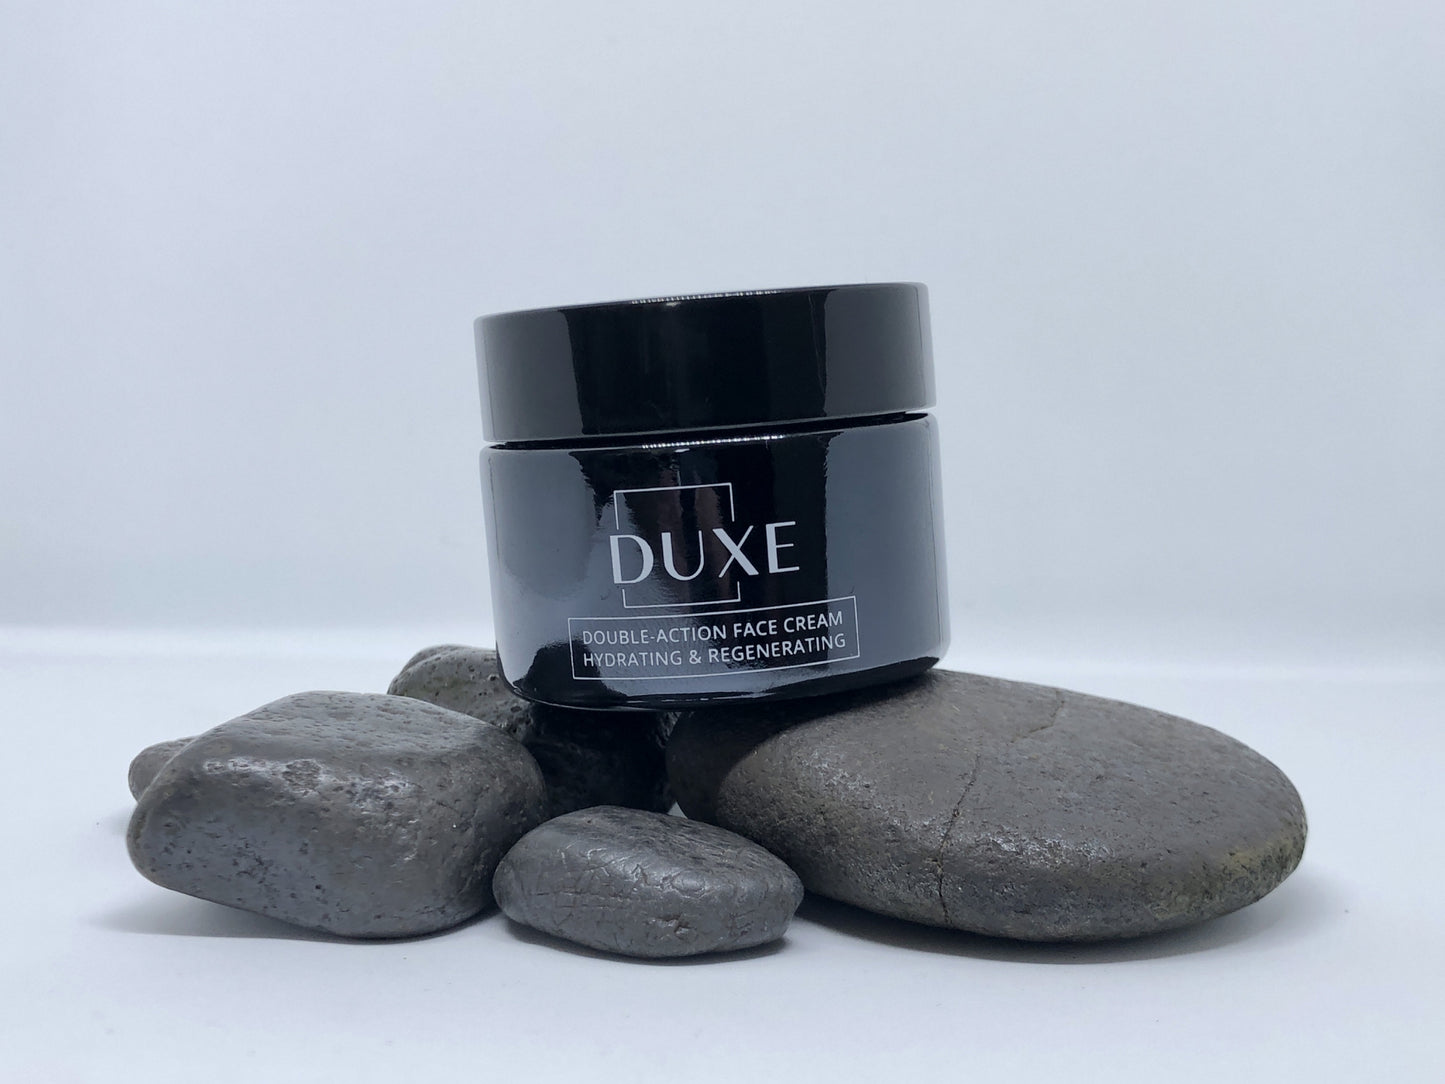 Double-Action Face Cream - Hydrating & Regenerating